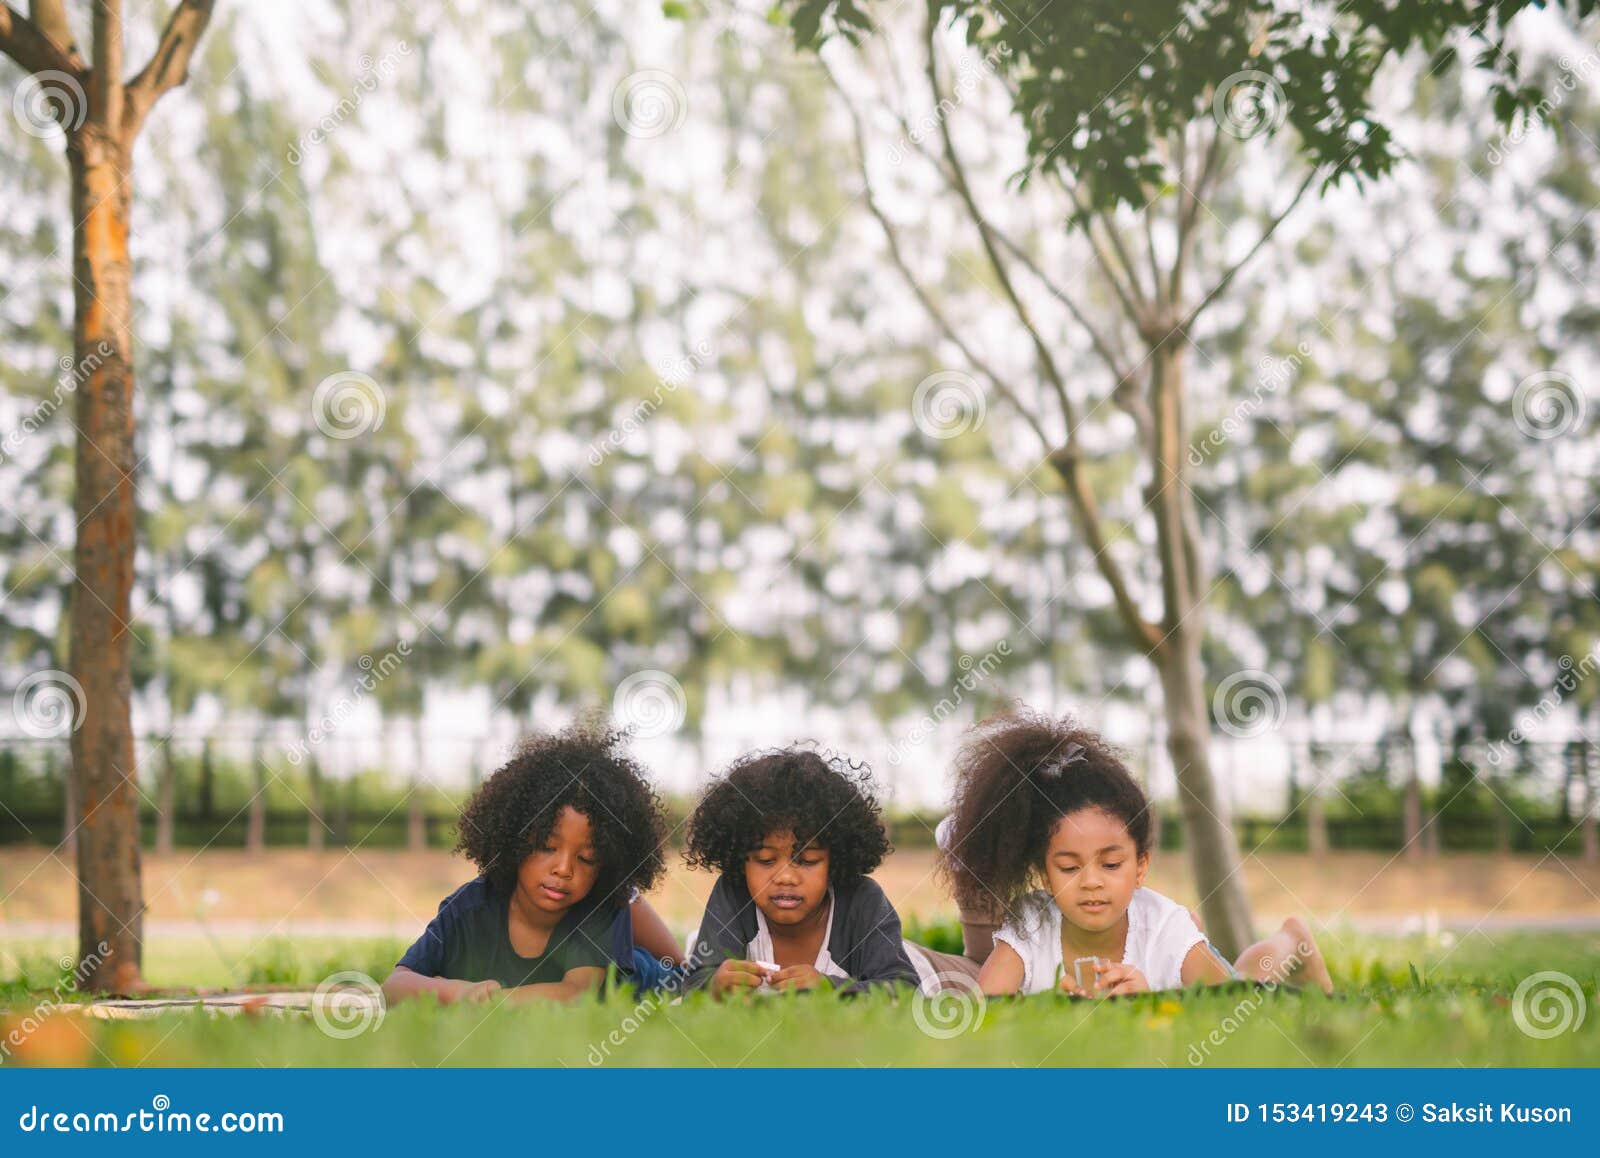 Tilslutte Professor Kig forbi Happy Three Little Friends Laying on the Grass in the Park. American African  Children Playing Toy in Park. Stock Image - Image of diverse, african:  153419243